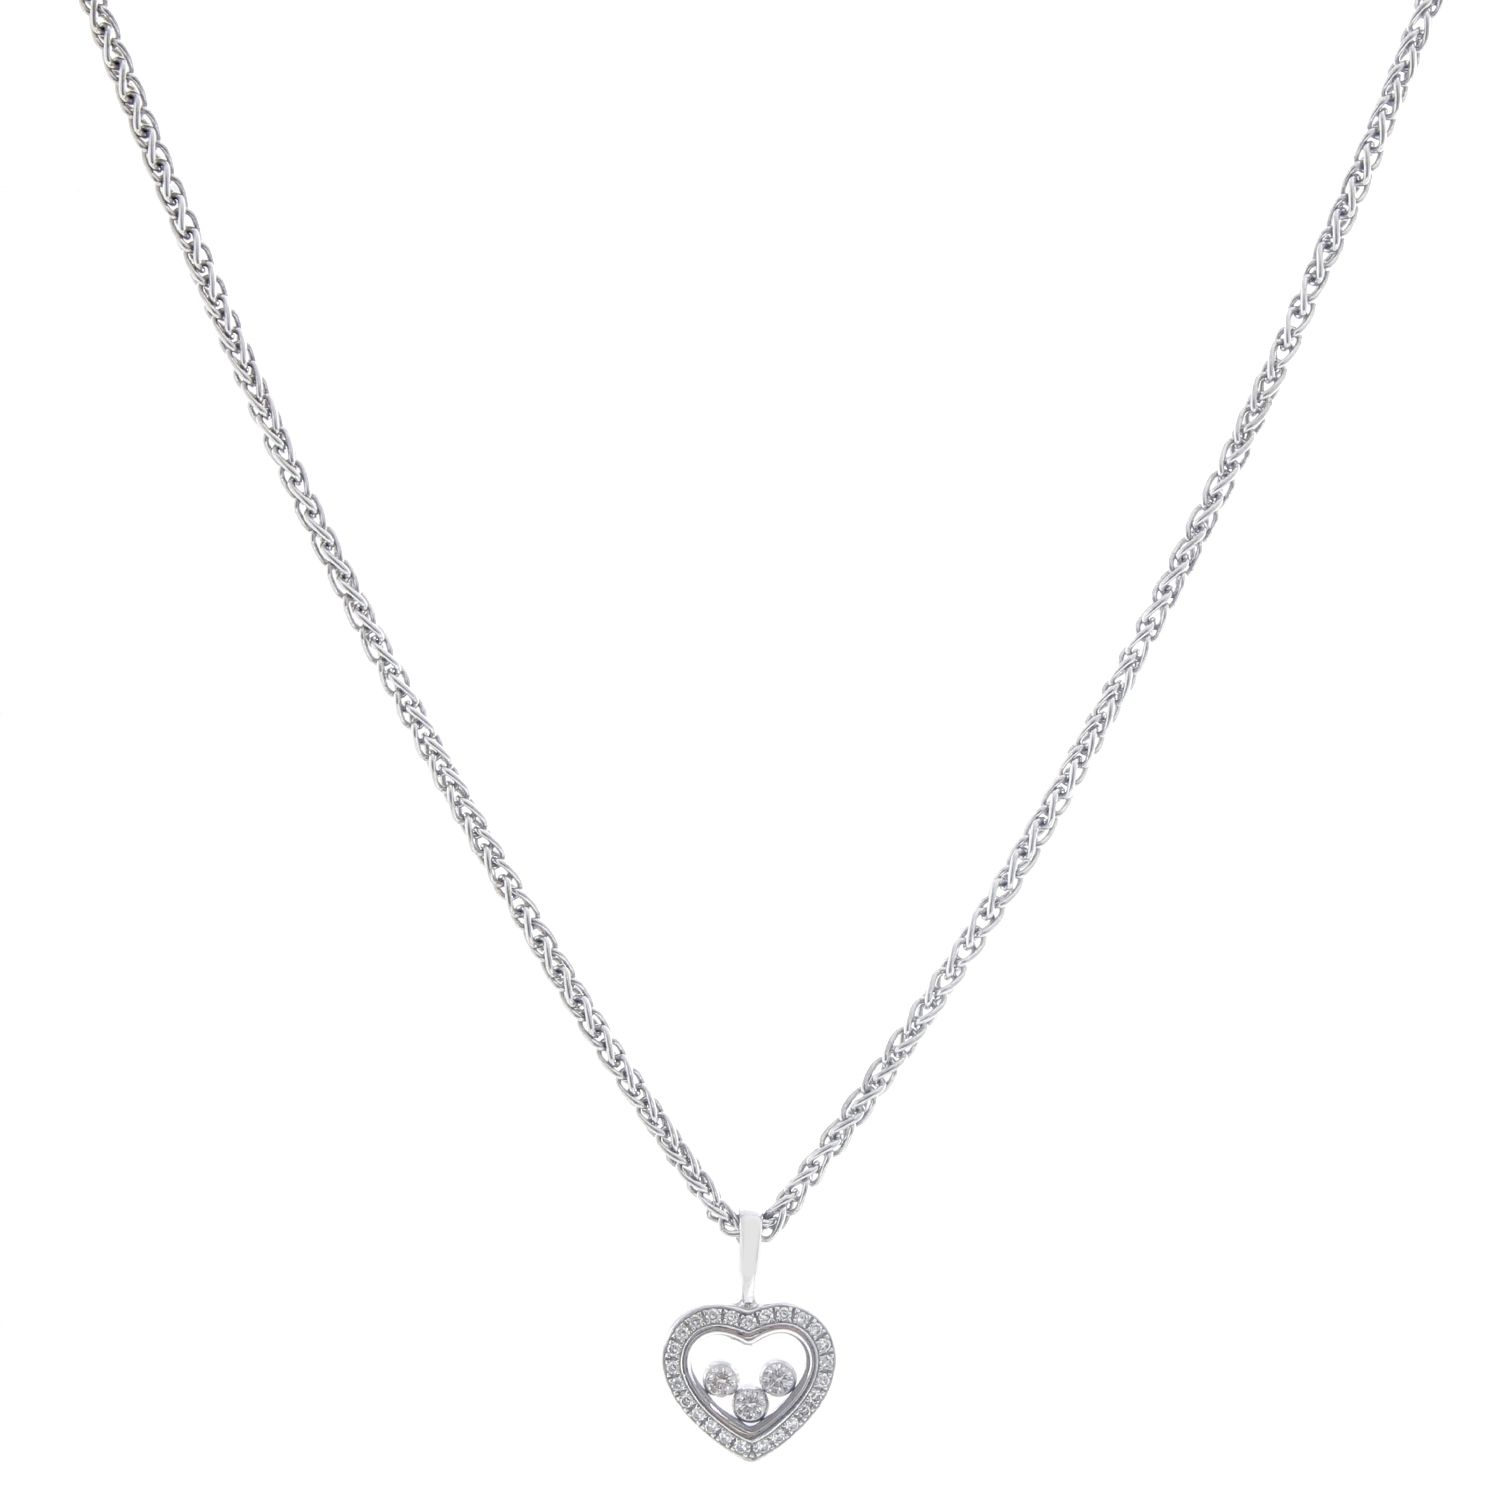 Buy Heart Shape Diamond Necklace, Natural Diamond Pendant, 14K Gold Necklace,  Diamond Layering Necklace, Floating Diamond, Drop Necklace Online in India  - Etsy